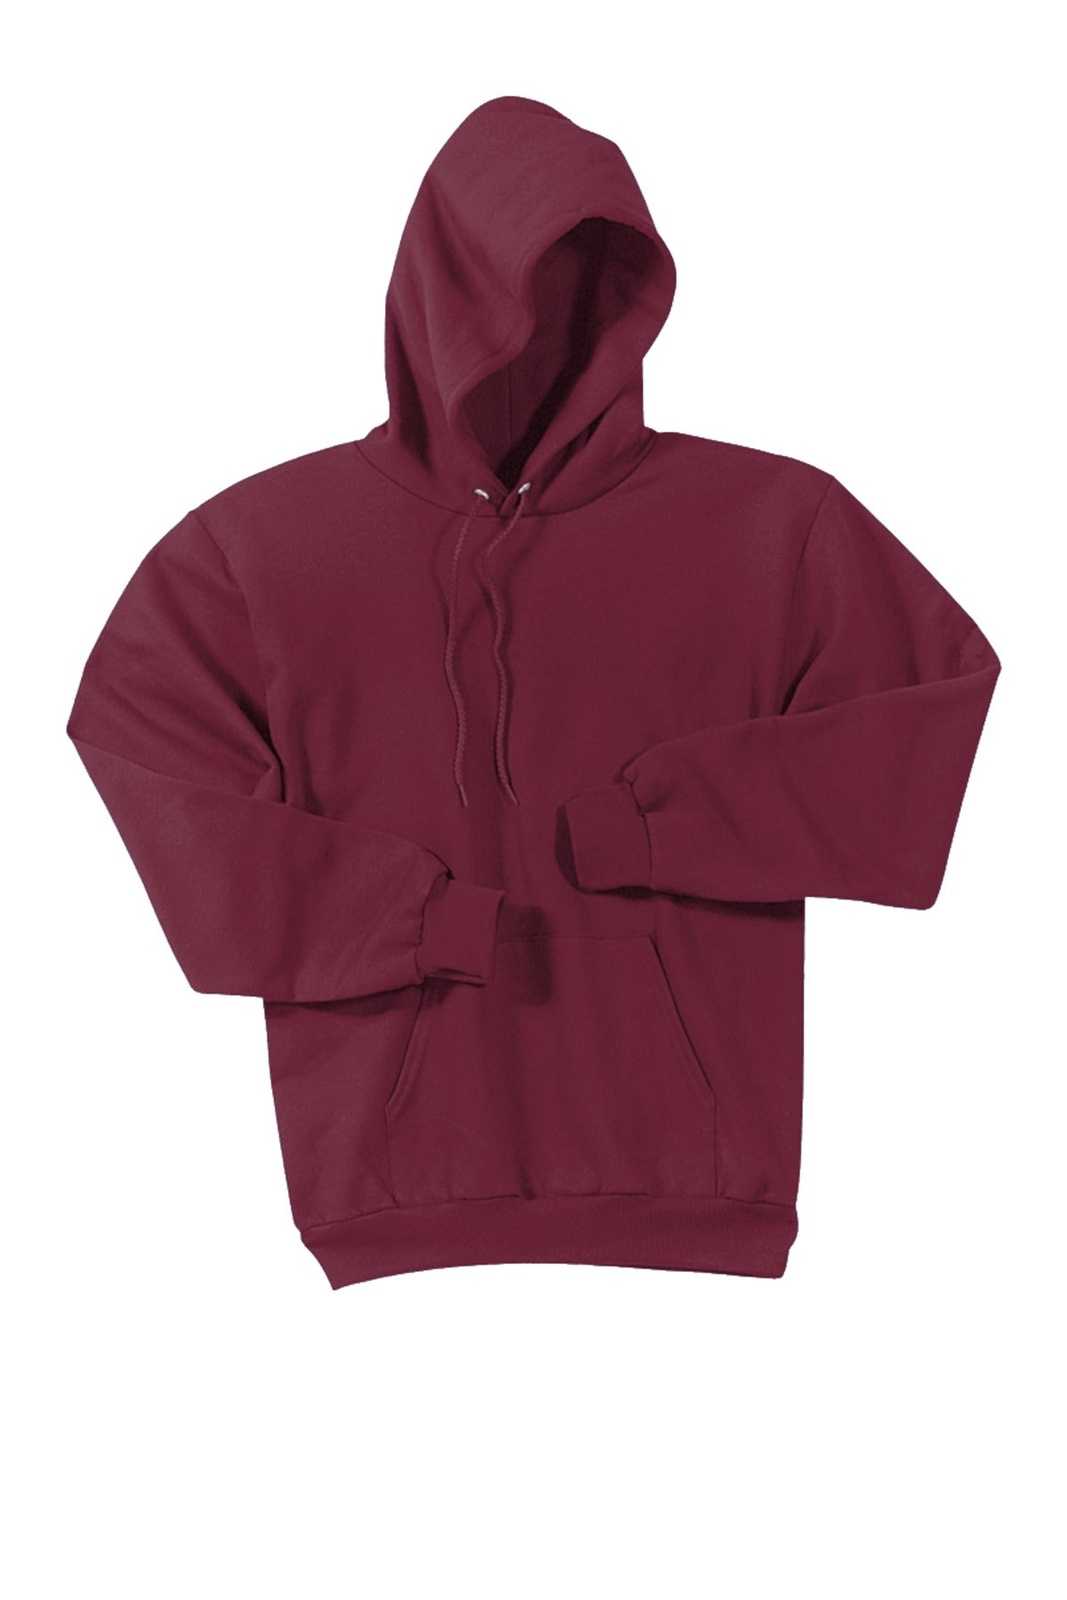 Port & Company PC90HT Tall Essential Fleece Pullover Hooded Sweatshirt - Cardinal - HIT a Double - 1